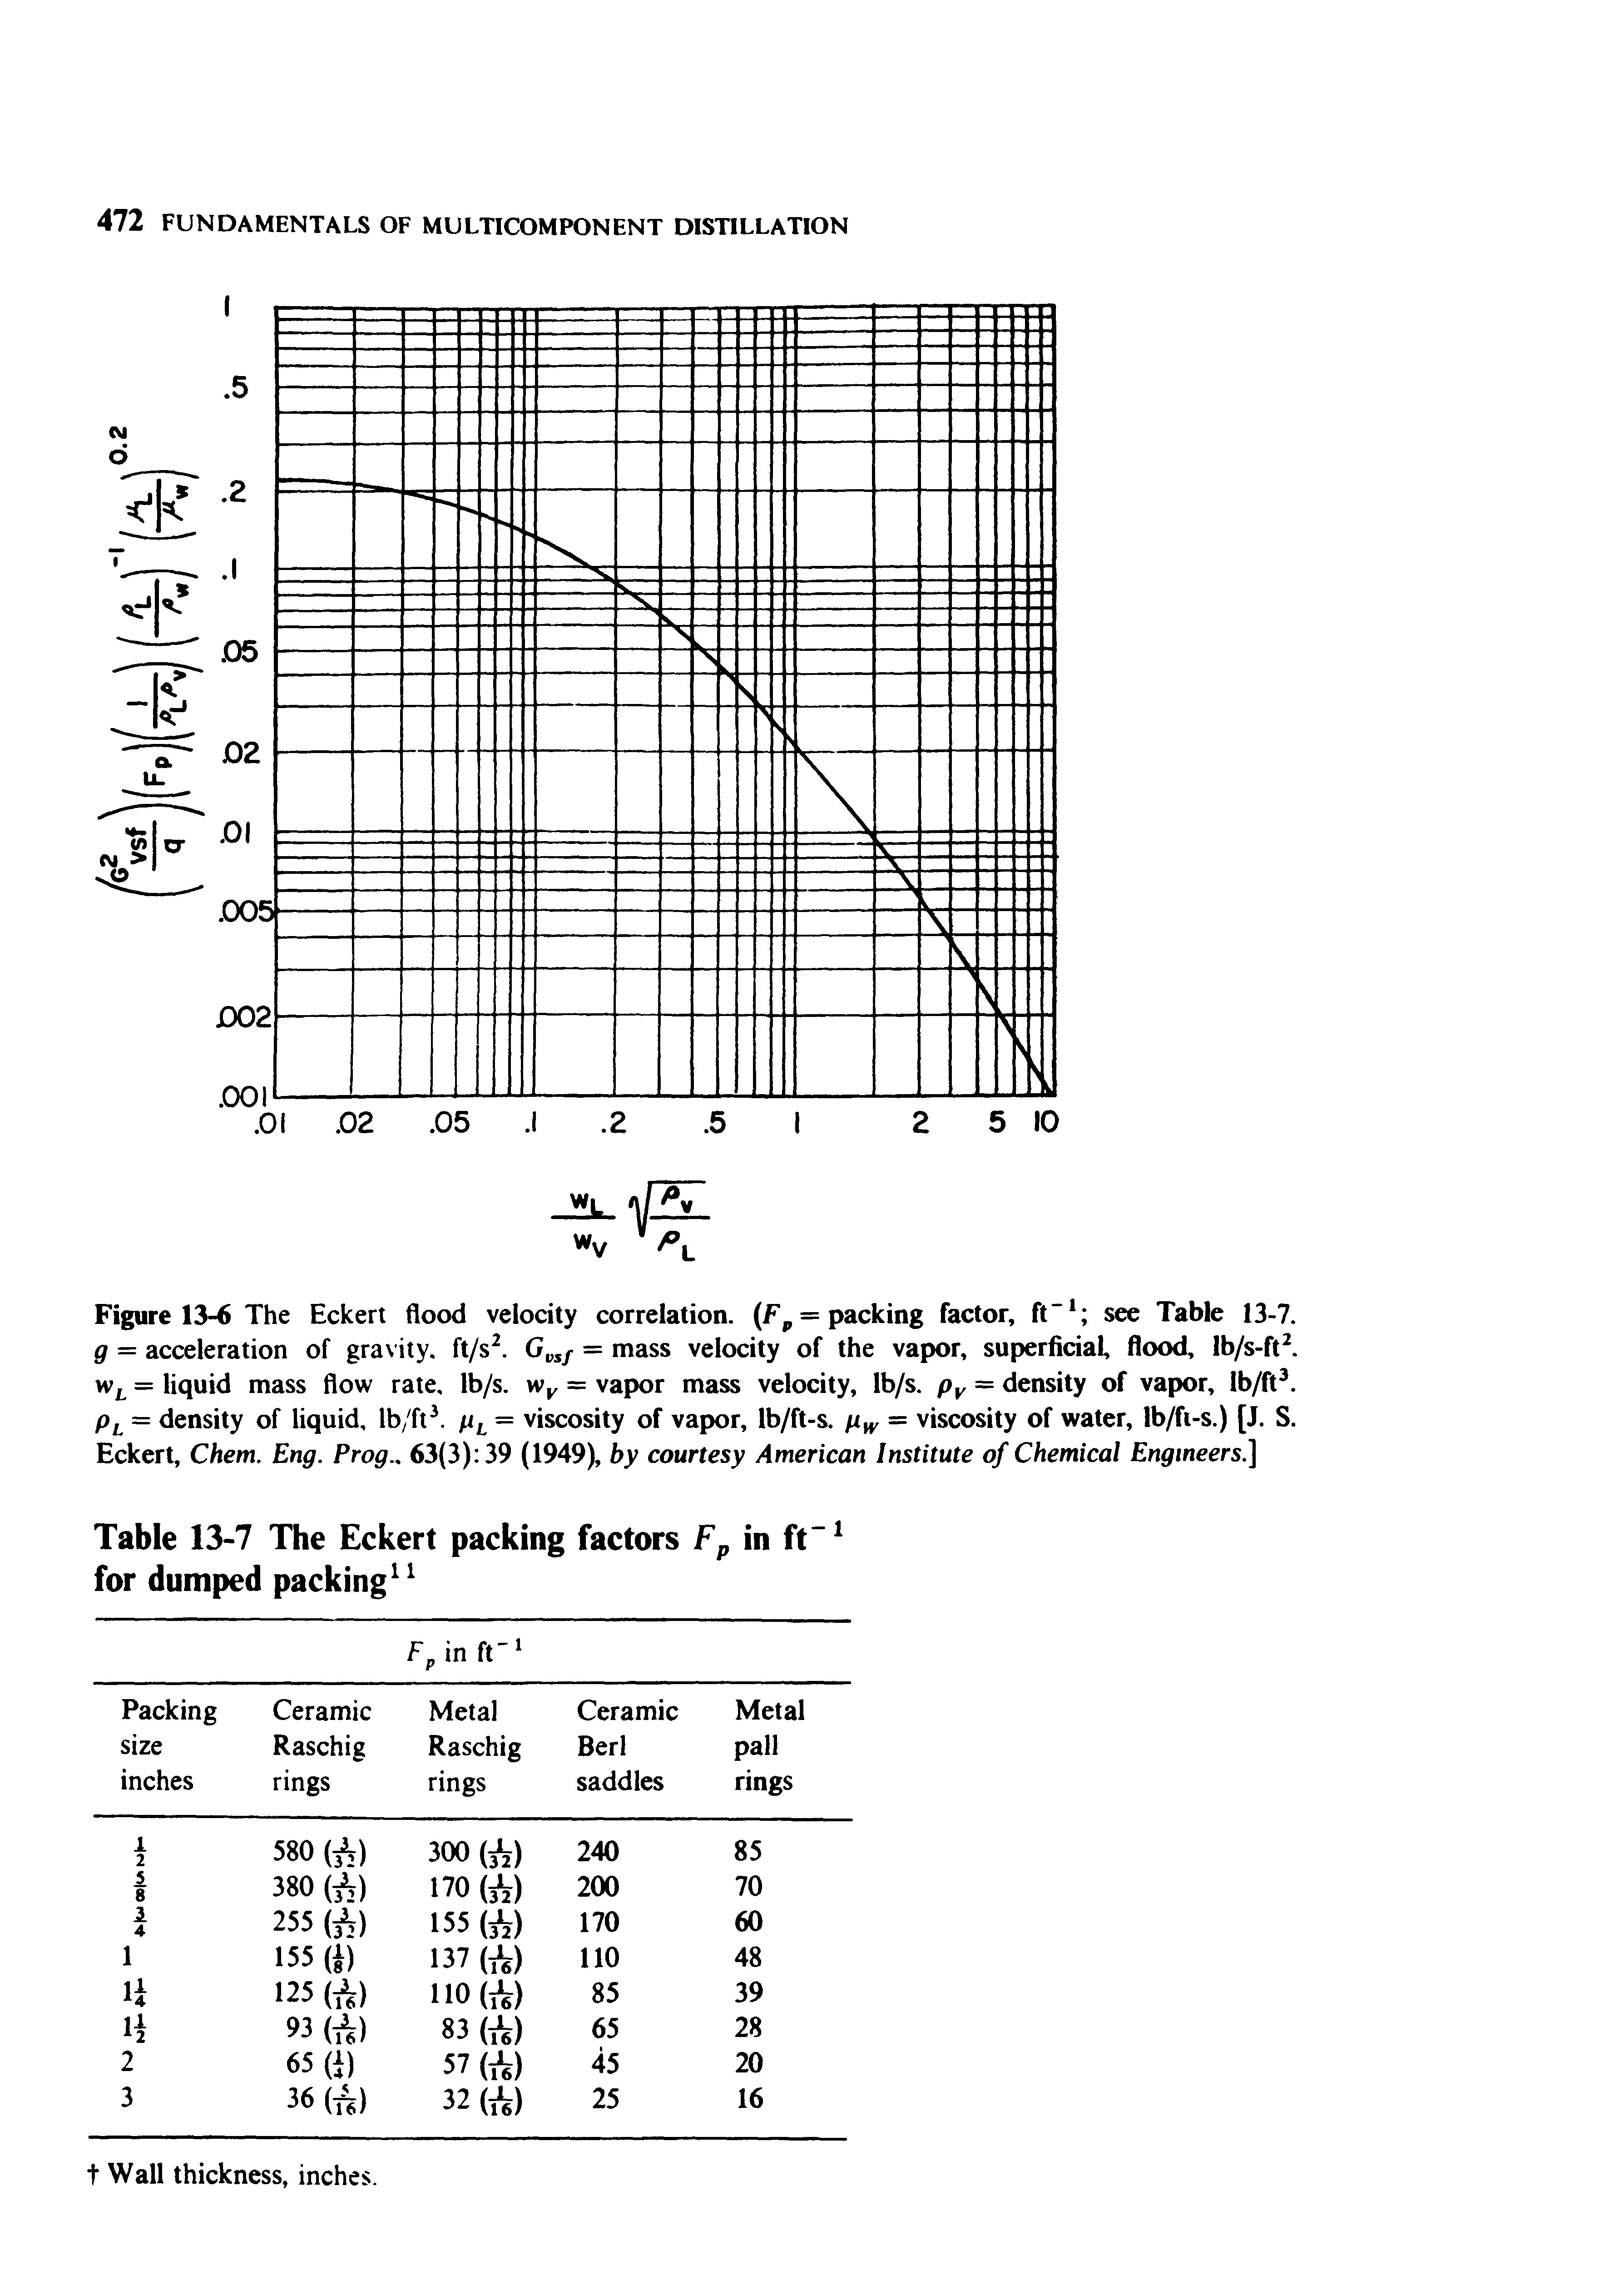 Figure 13-6 The Eckert flood velocity correlation. (Fp = packing factor, ft"1 see Table 13-7. g = acceleration of gravity, ft/s2. Gvsf = mass velocity of the vapor, superficial, flood, lb/s-ft2. wL = liquid mass flow rate, lb/s. wv = vapor mass velocity, lb/s. pv = density of vapor, lb/ft3. pL = density of liquid, lb/ft3. p, = viscosity of vapor, lb/ft-s. pw — viscosity of water, lb/ft-s.) [J. S. Eckert, Chem. Eng. Prog.. 63(3) 39 (1949), by courtesy American Institute of Chemical Engineers.]...